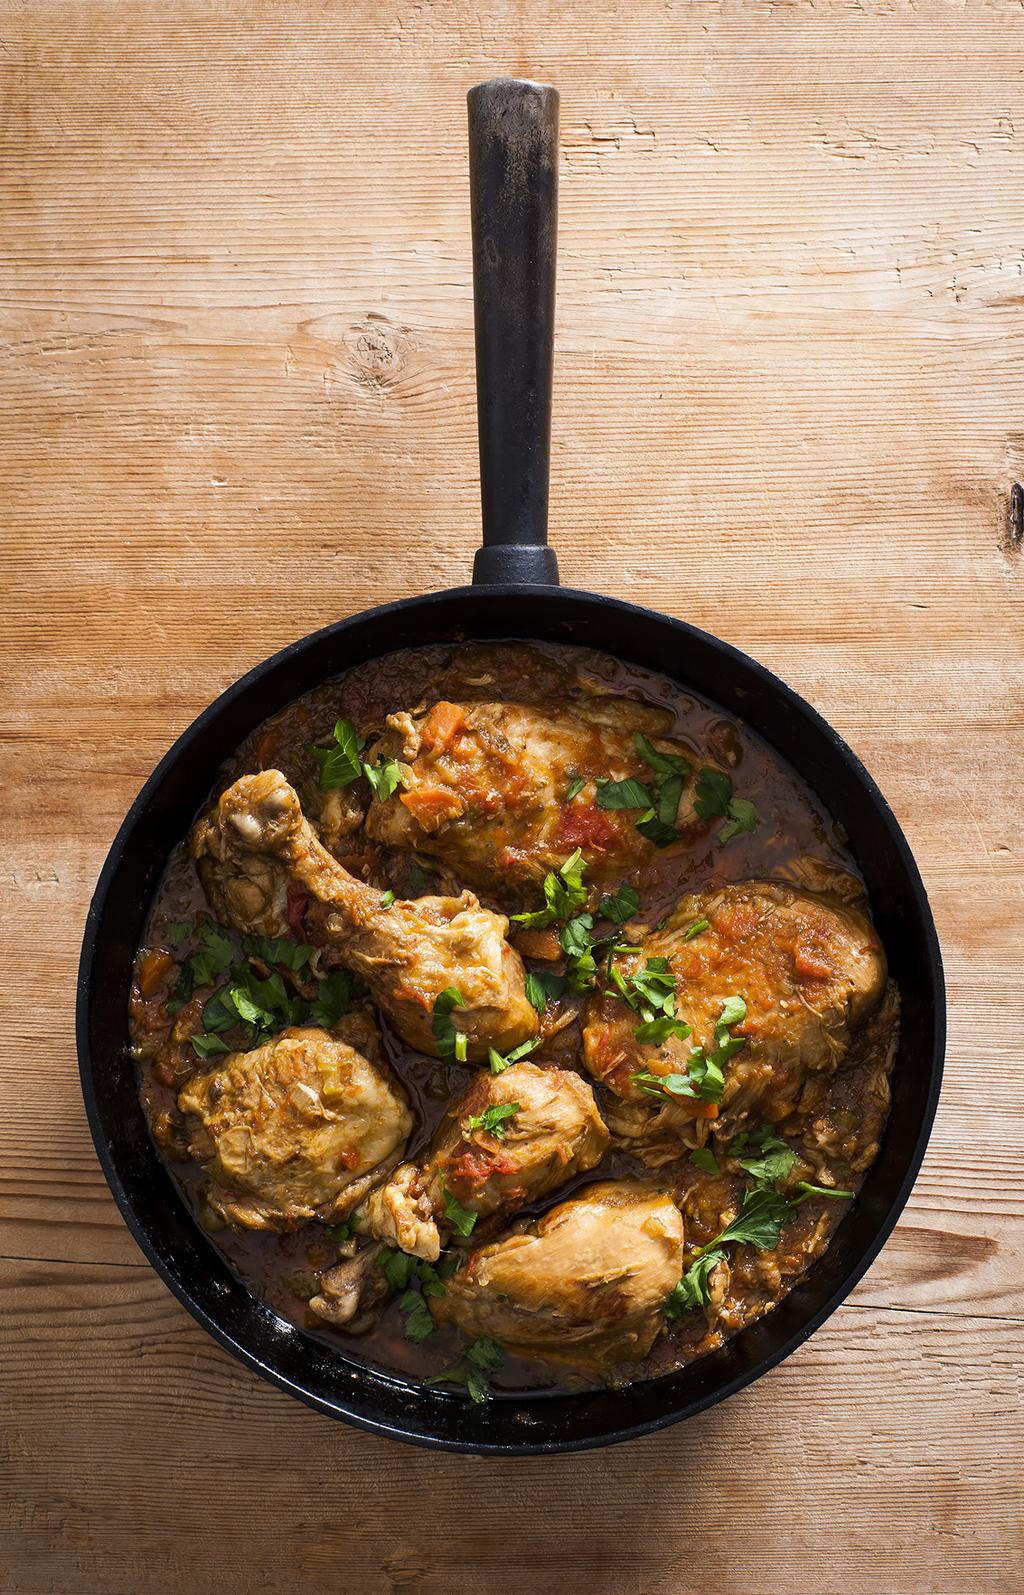 Pollo alla cacciatora Chicken Cacciatore Serves 4 Preparation: 25 minutes Cooking: 1 hour 1 chicken, cut into pieces 2 tablespoons butter 3 tablespoons olive oil 1 onion, chopped 6 tomatoes, peeled,